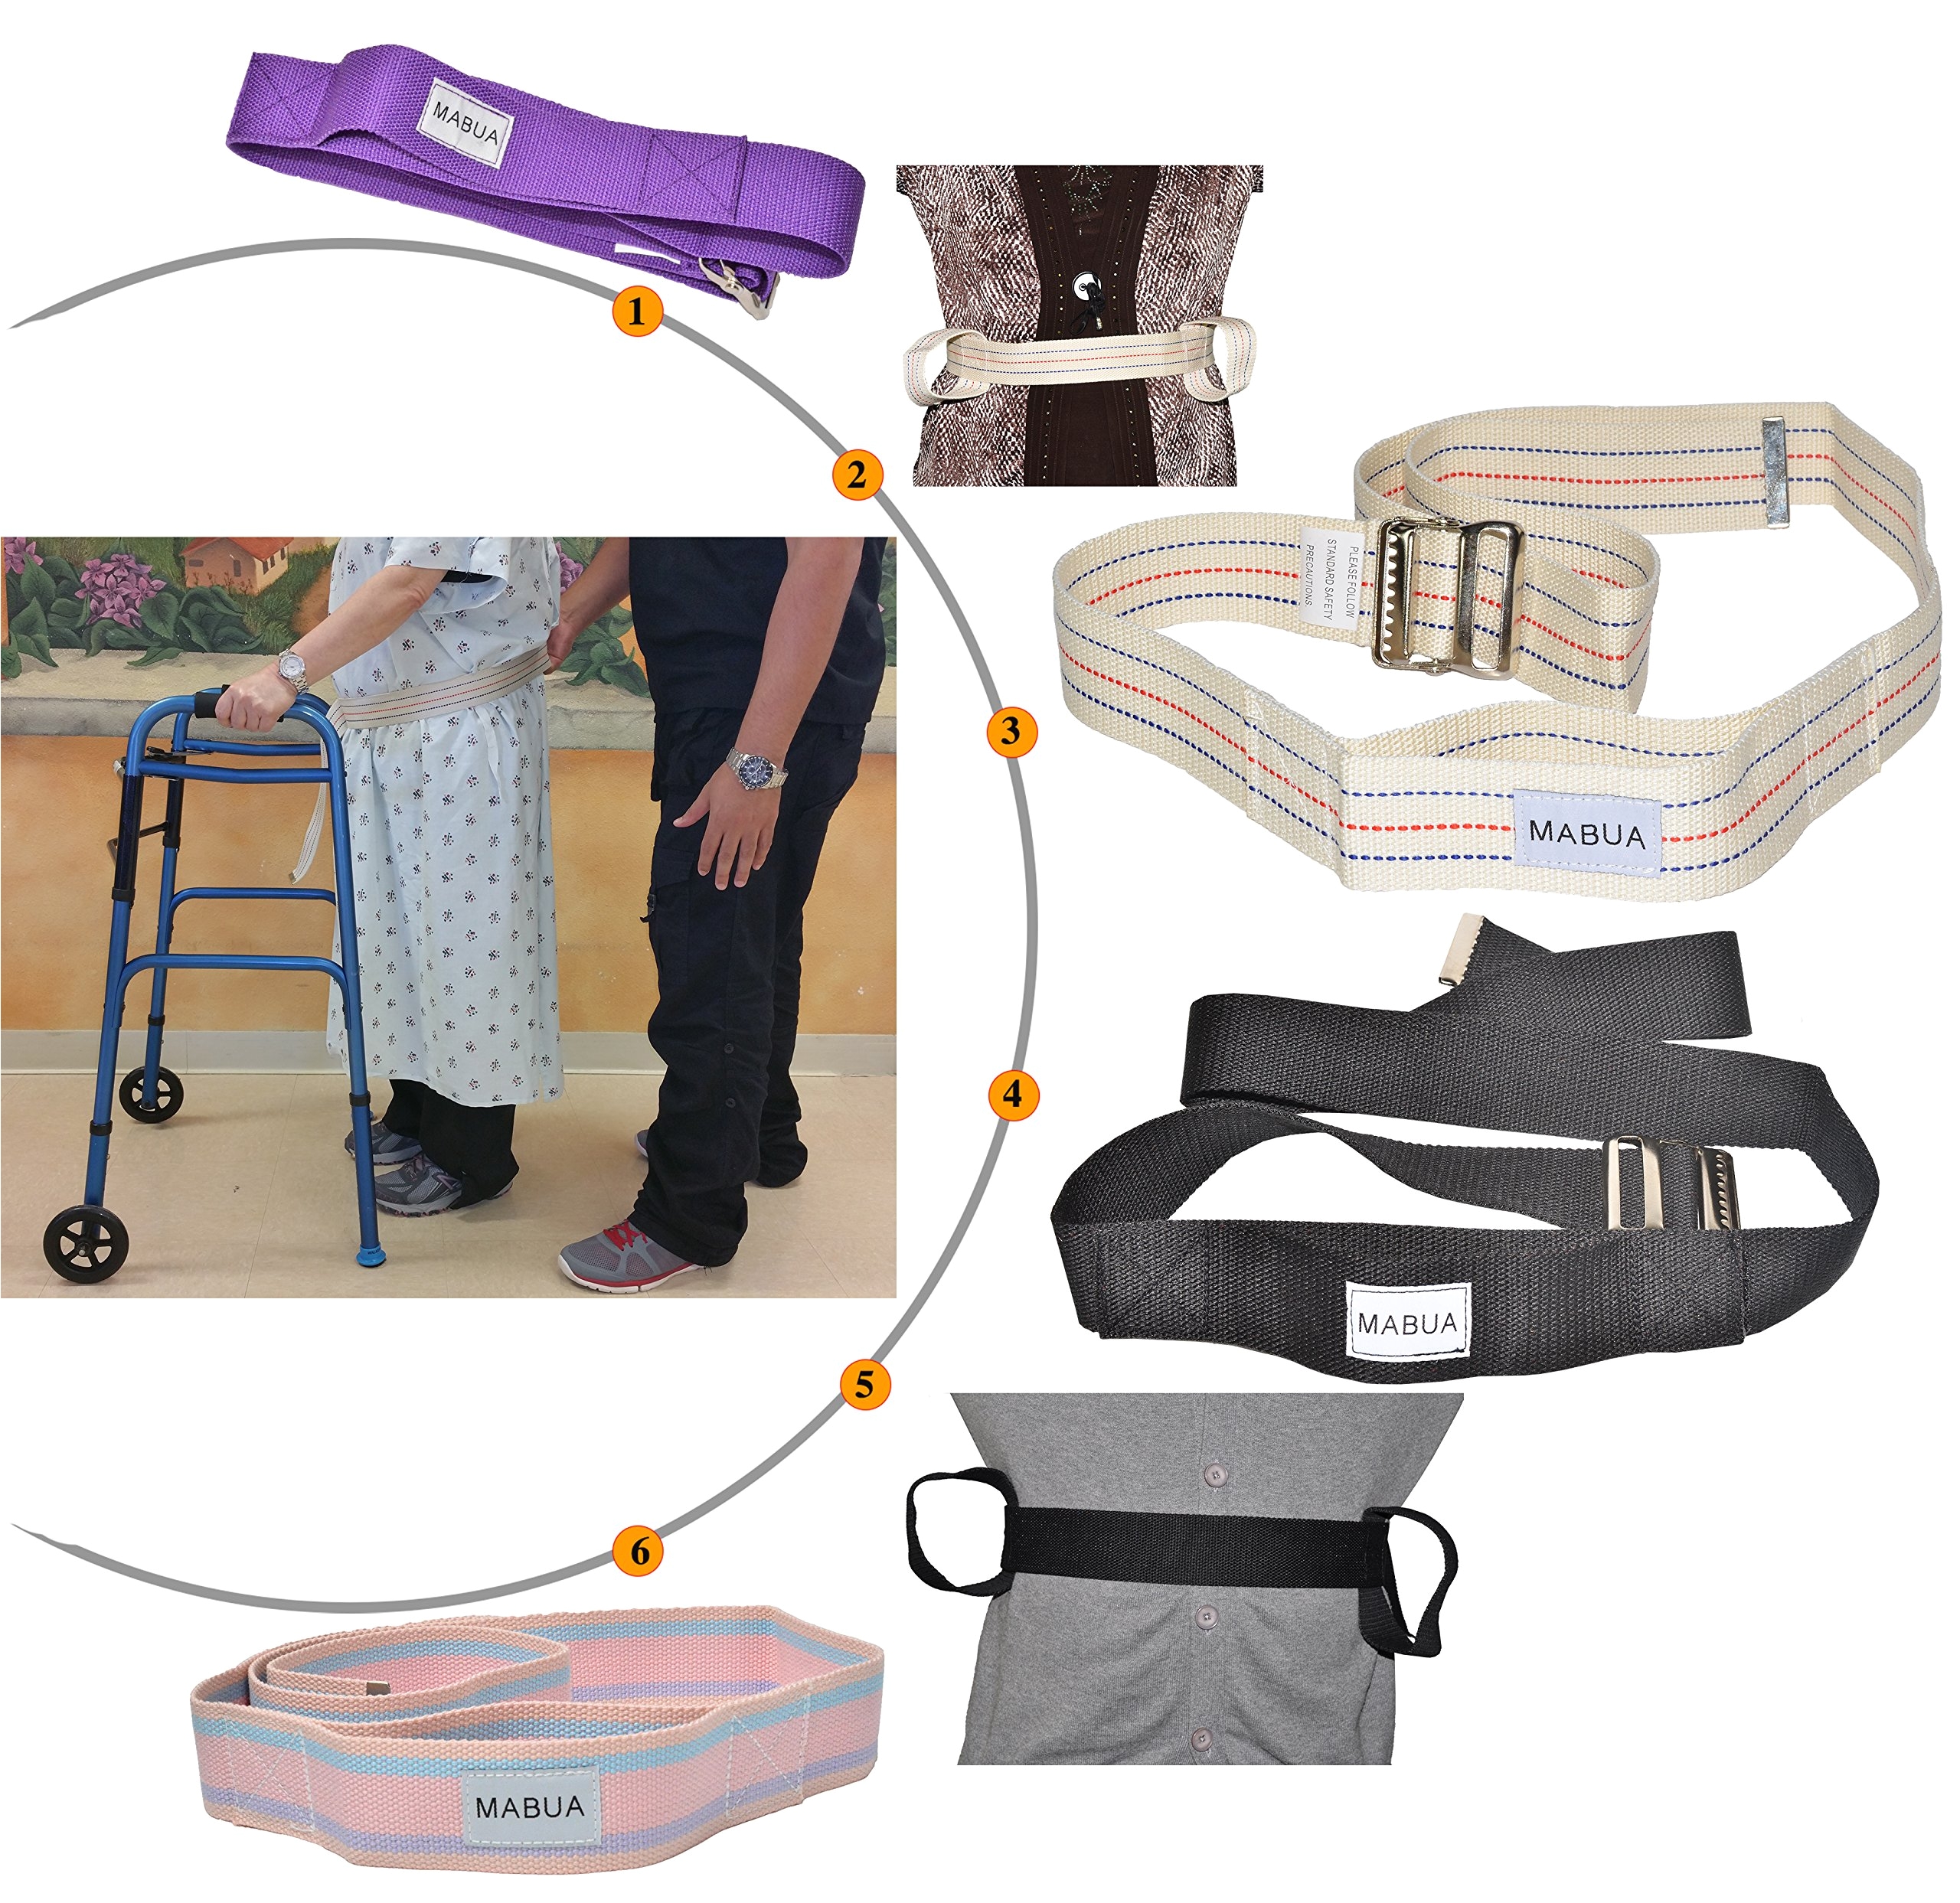 When Using A Transfer Belt to Transfer A Person to A Chair or Wheelchair Grasp the Belt at Amazon Com Physical therapy Gait Belt with Metal Buckle Black